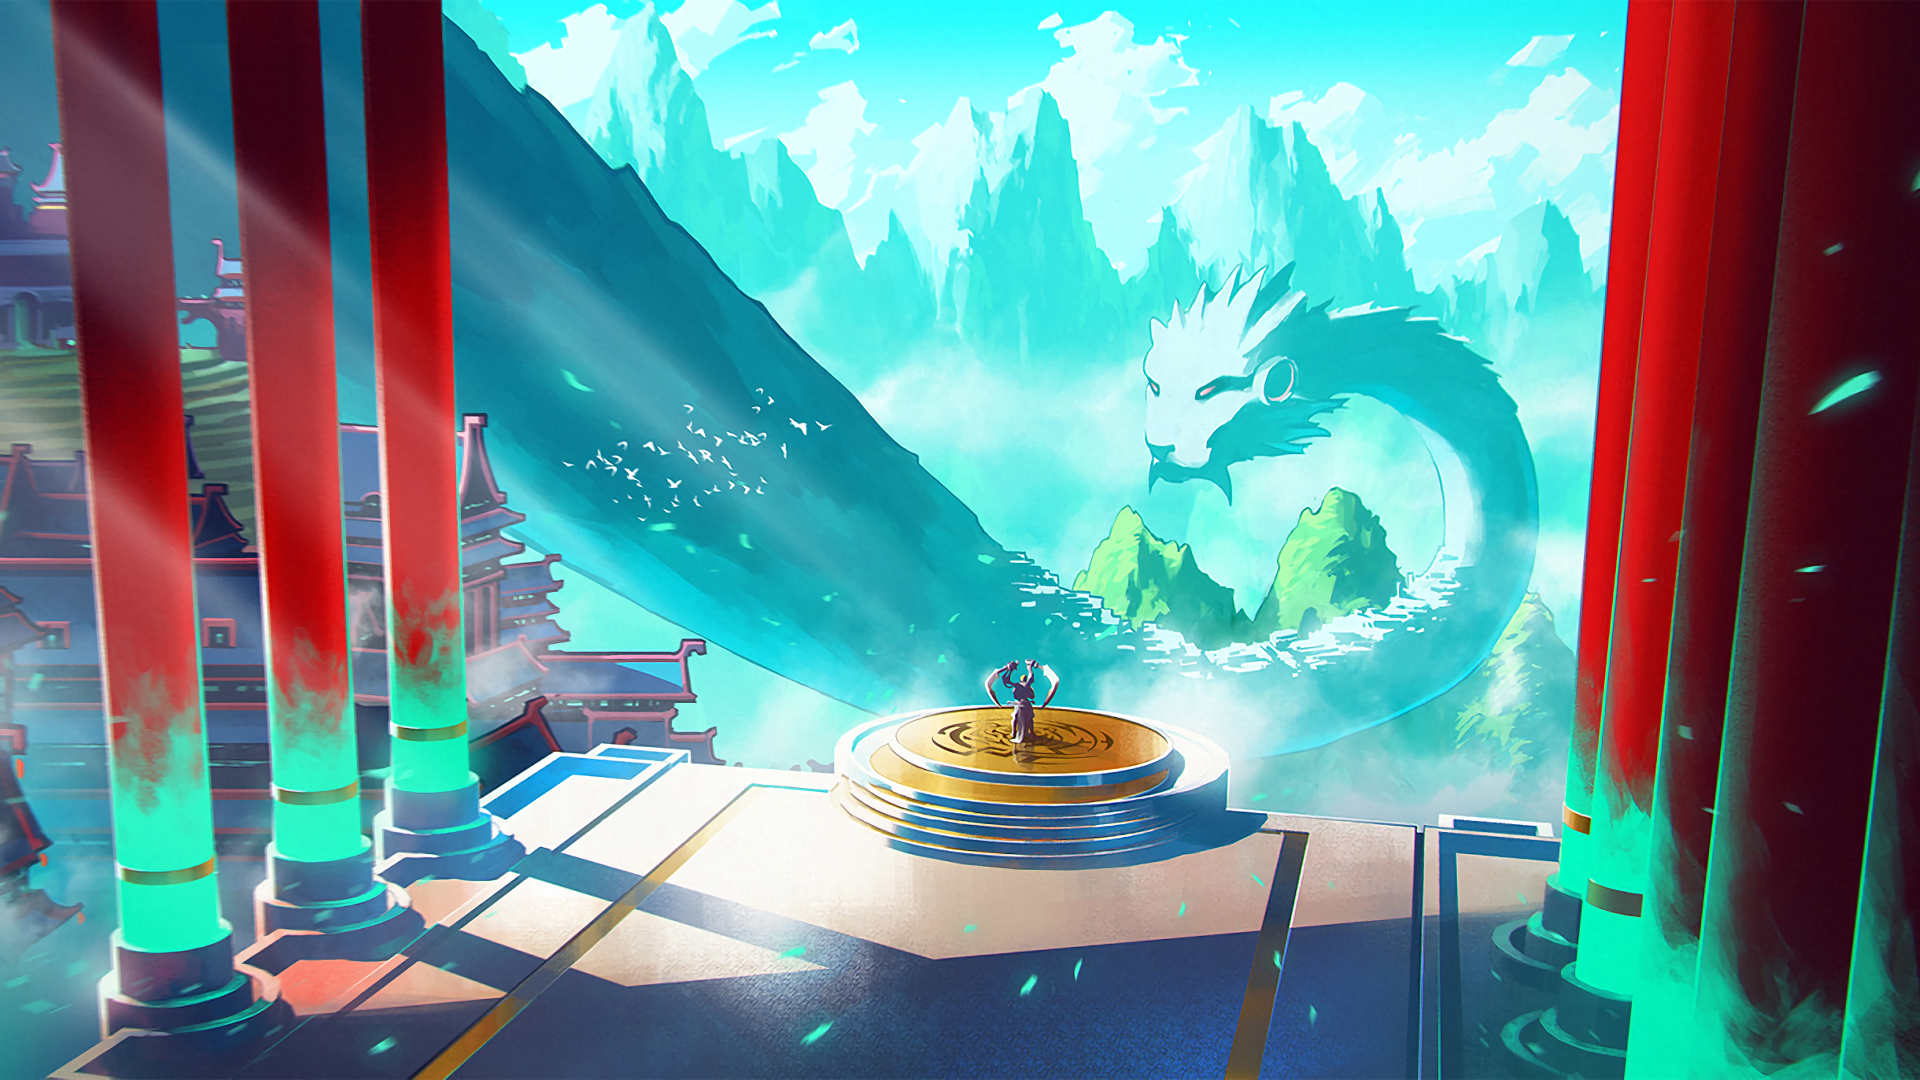 Video Game Duelyst 1920x1080